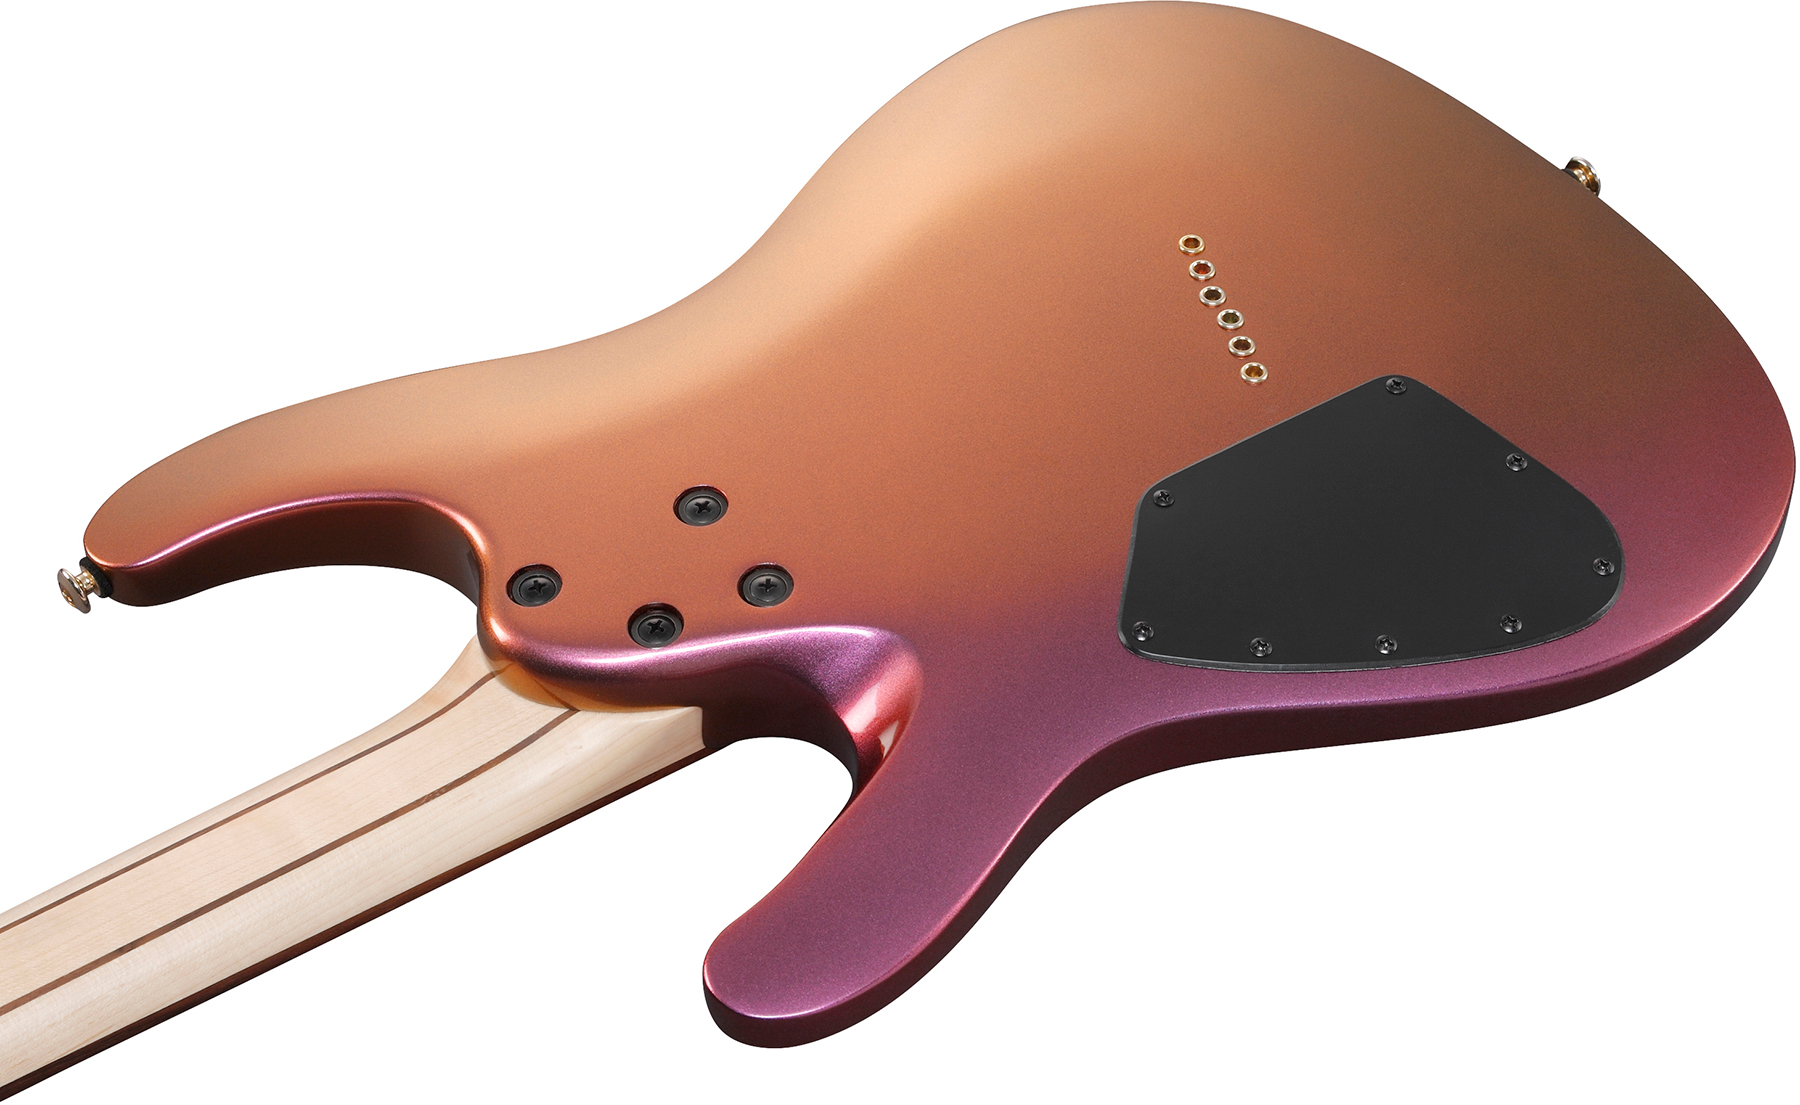 Ibanez Sml721 Rgc Axe Design Lab Multiscale 2h Ht Rw - Rose Gold Chameleon - Multi-Scale Guitar - Variation 3